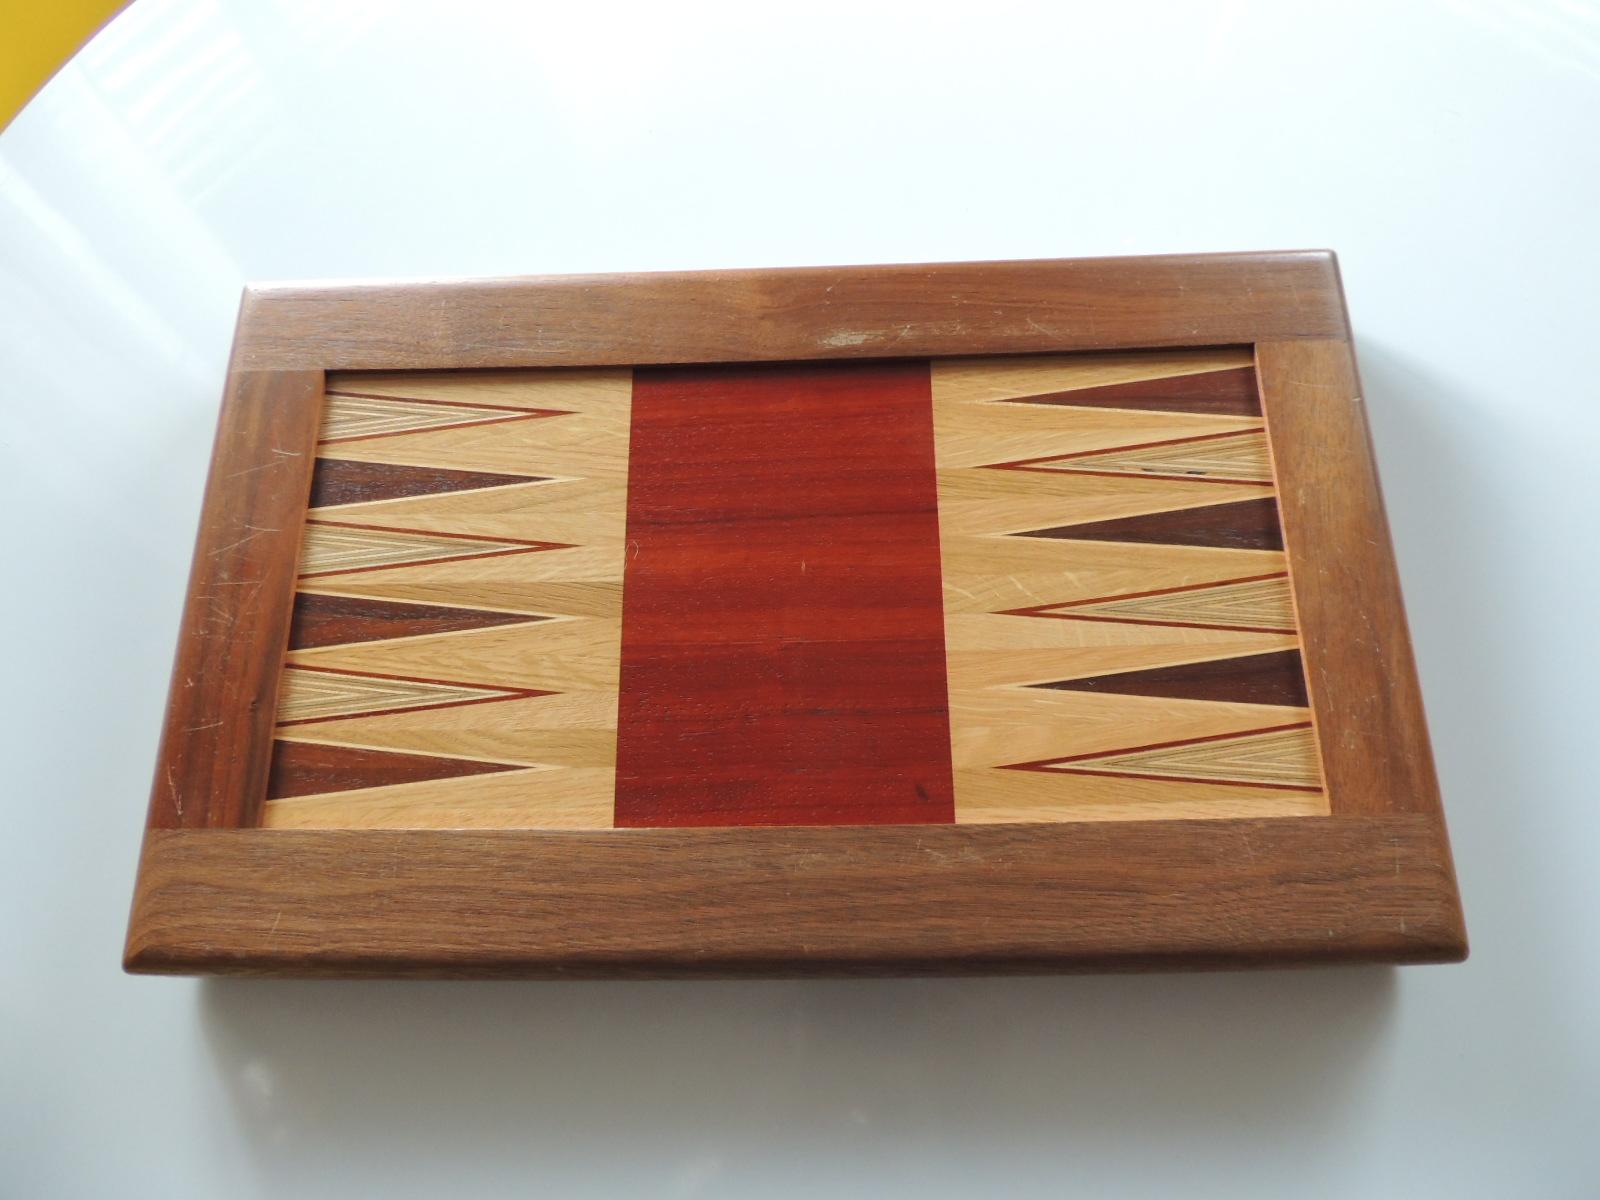 American Craftsman Large Red and Brown Vintage Style Wood Inlaid Backgammon Game Board